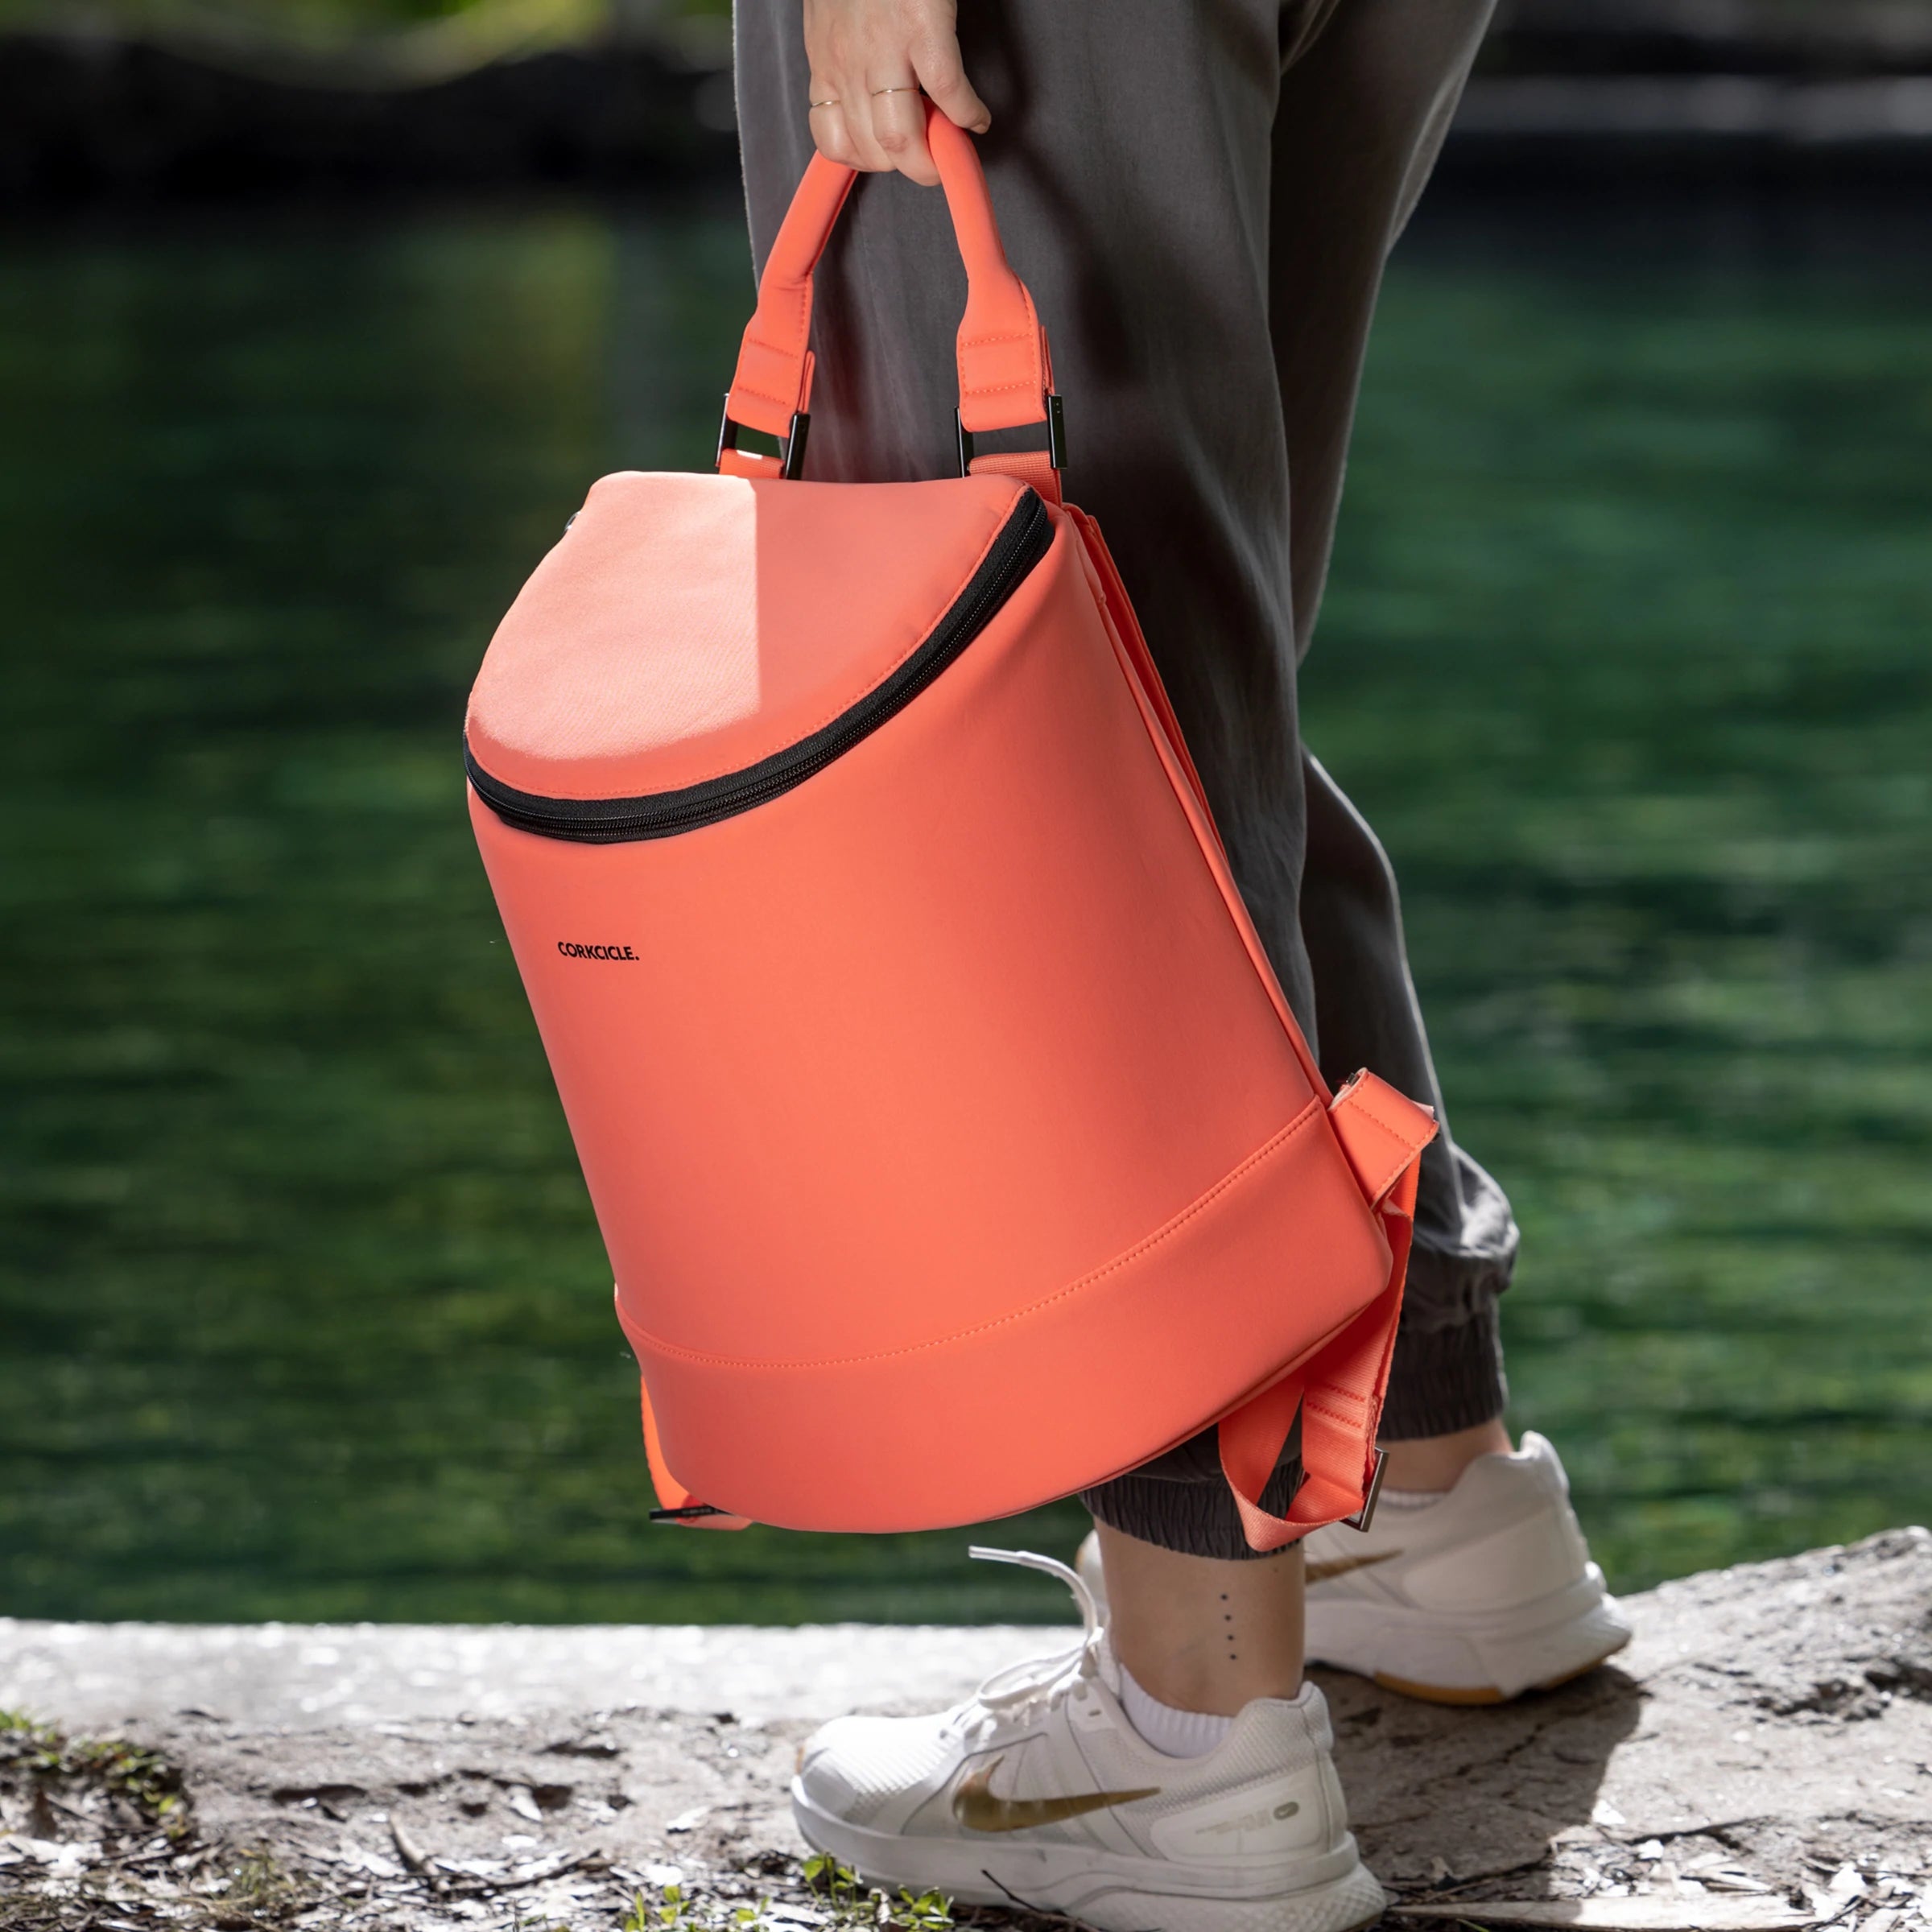 Corkcicle's Backpack Cooler Is Perfect for Summer Picnics